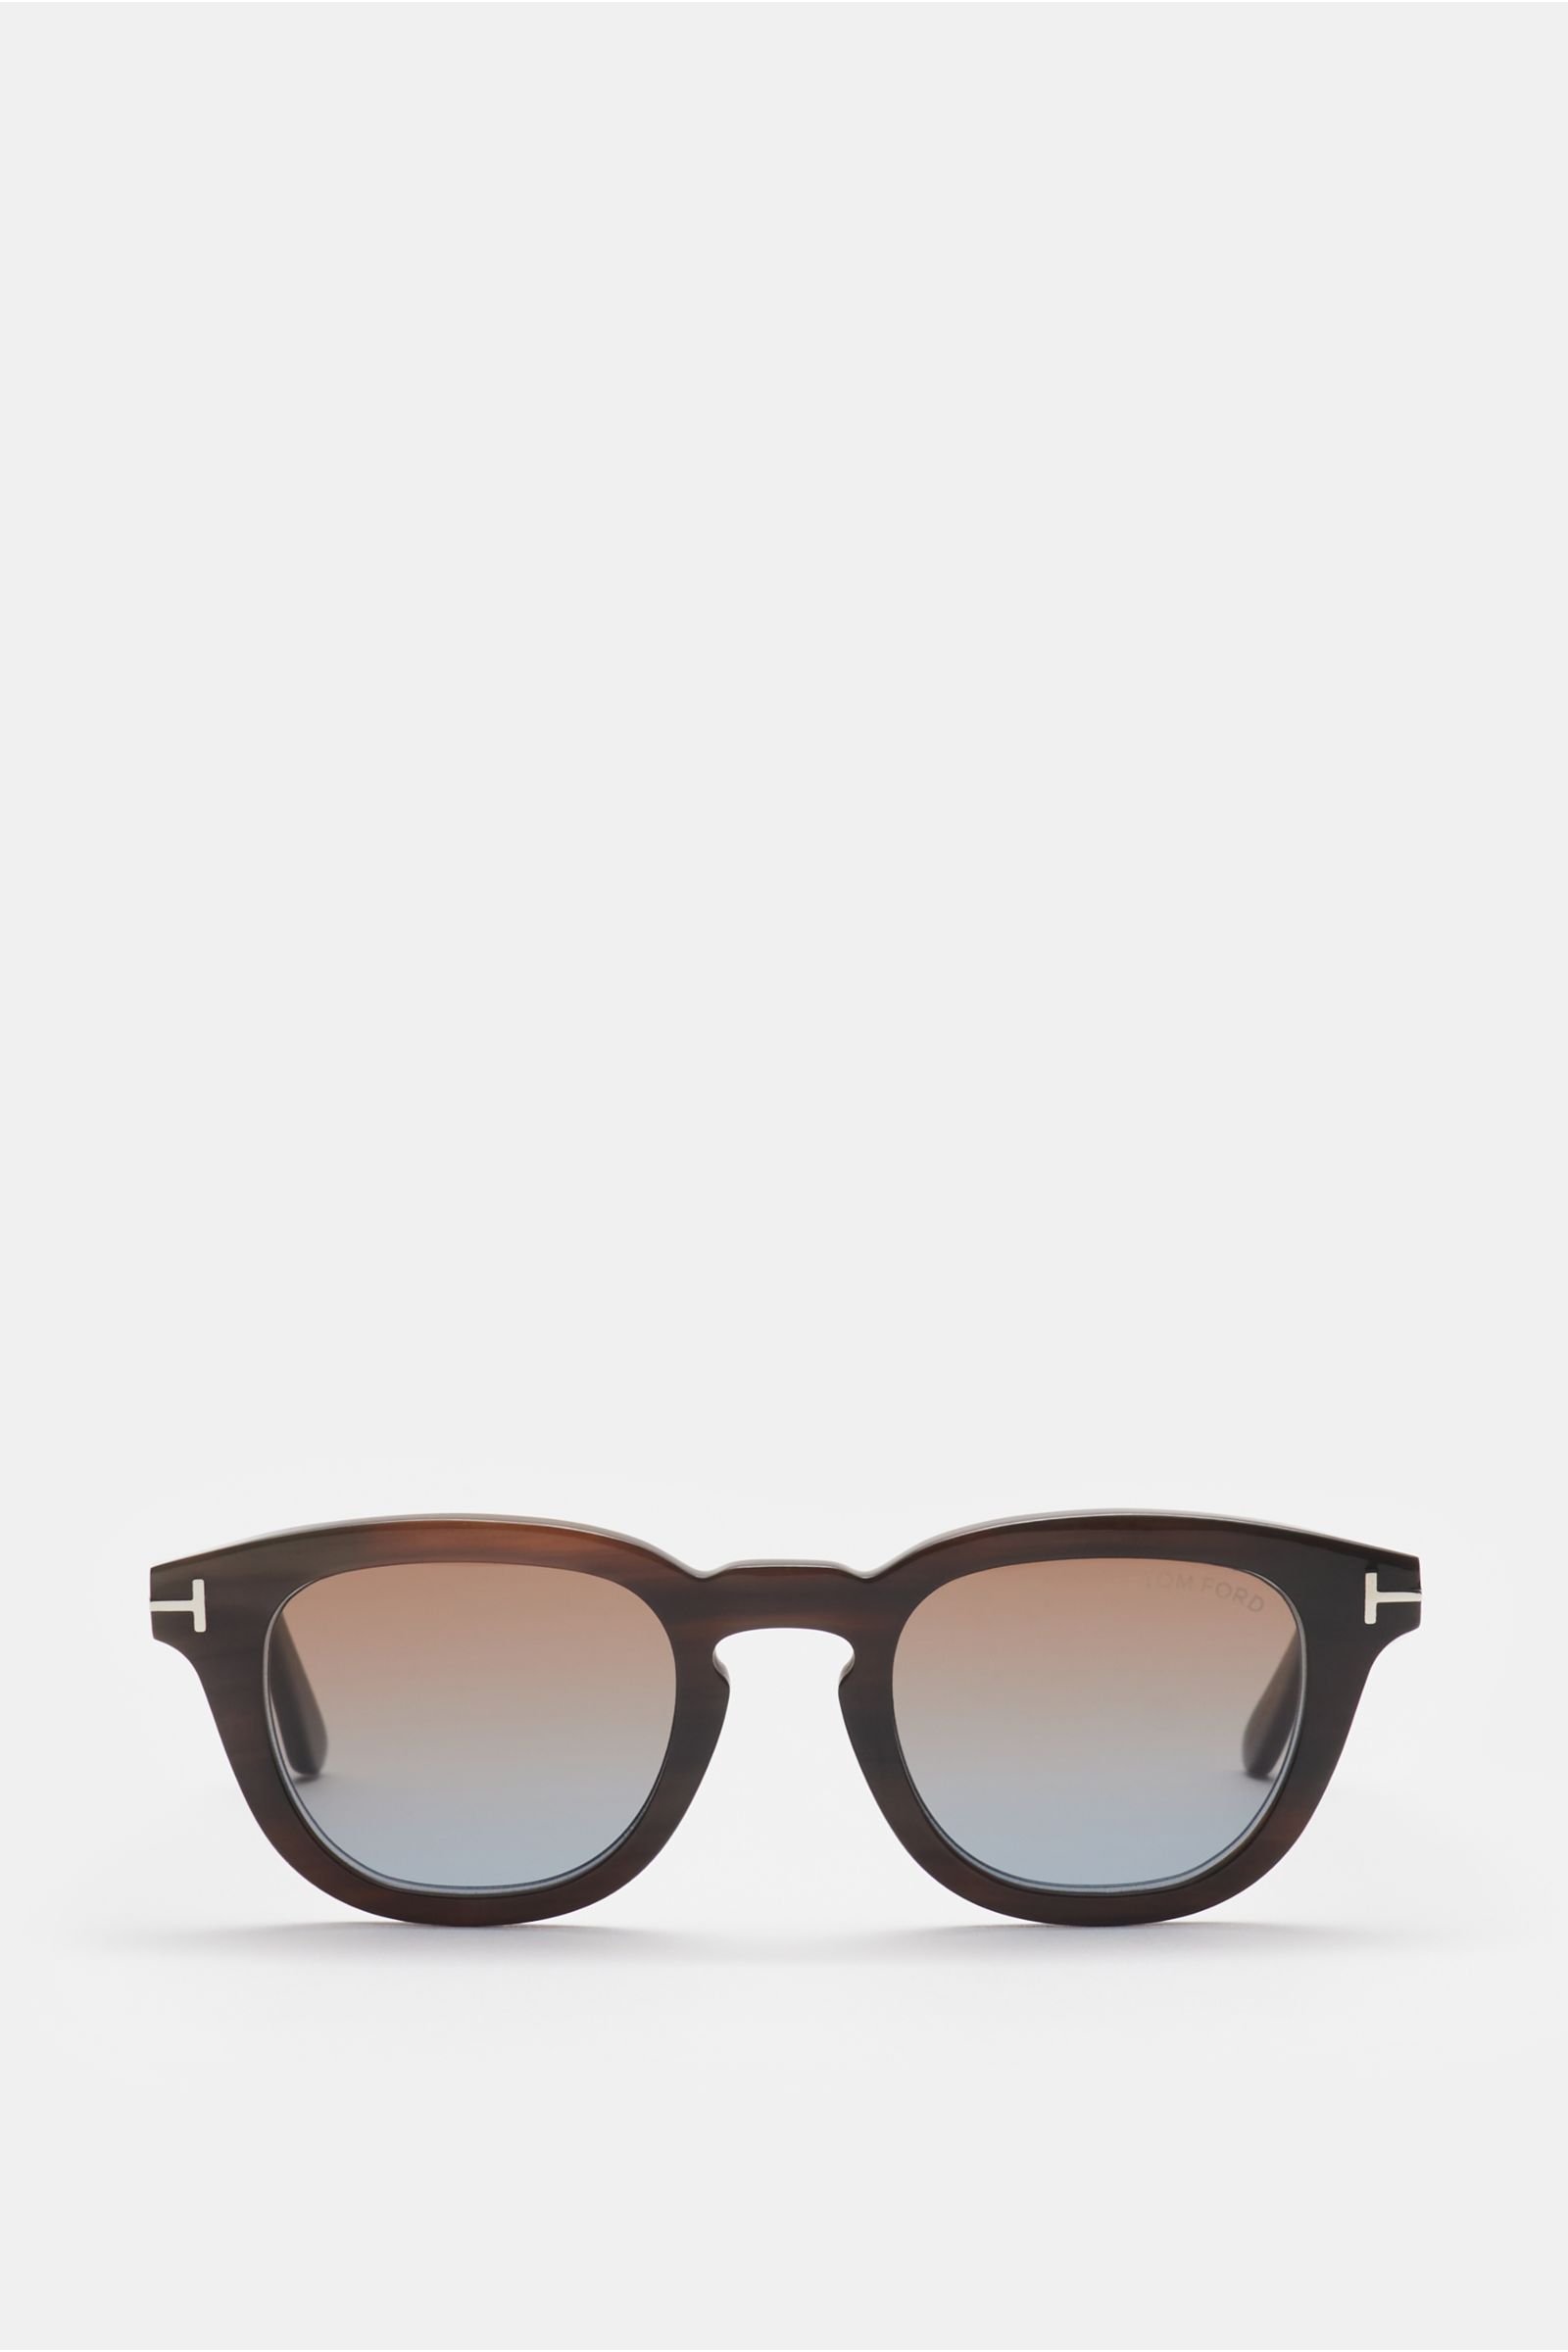 Horn sunglasses 'Private Collection' grey-brown patterned/brown/blue